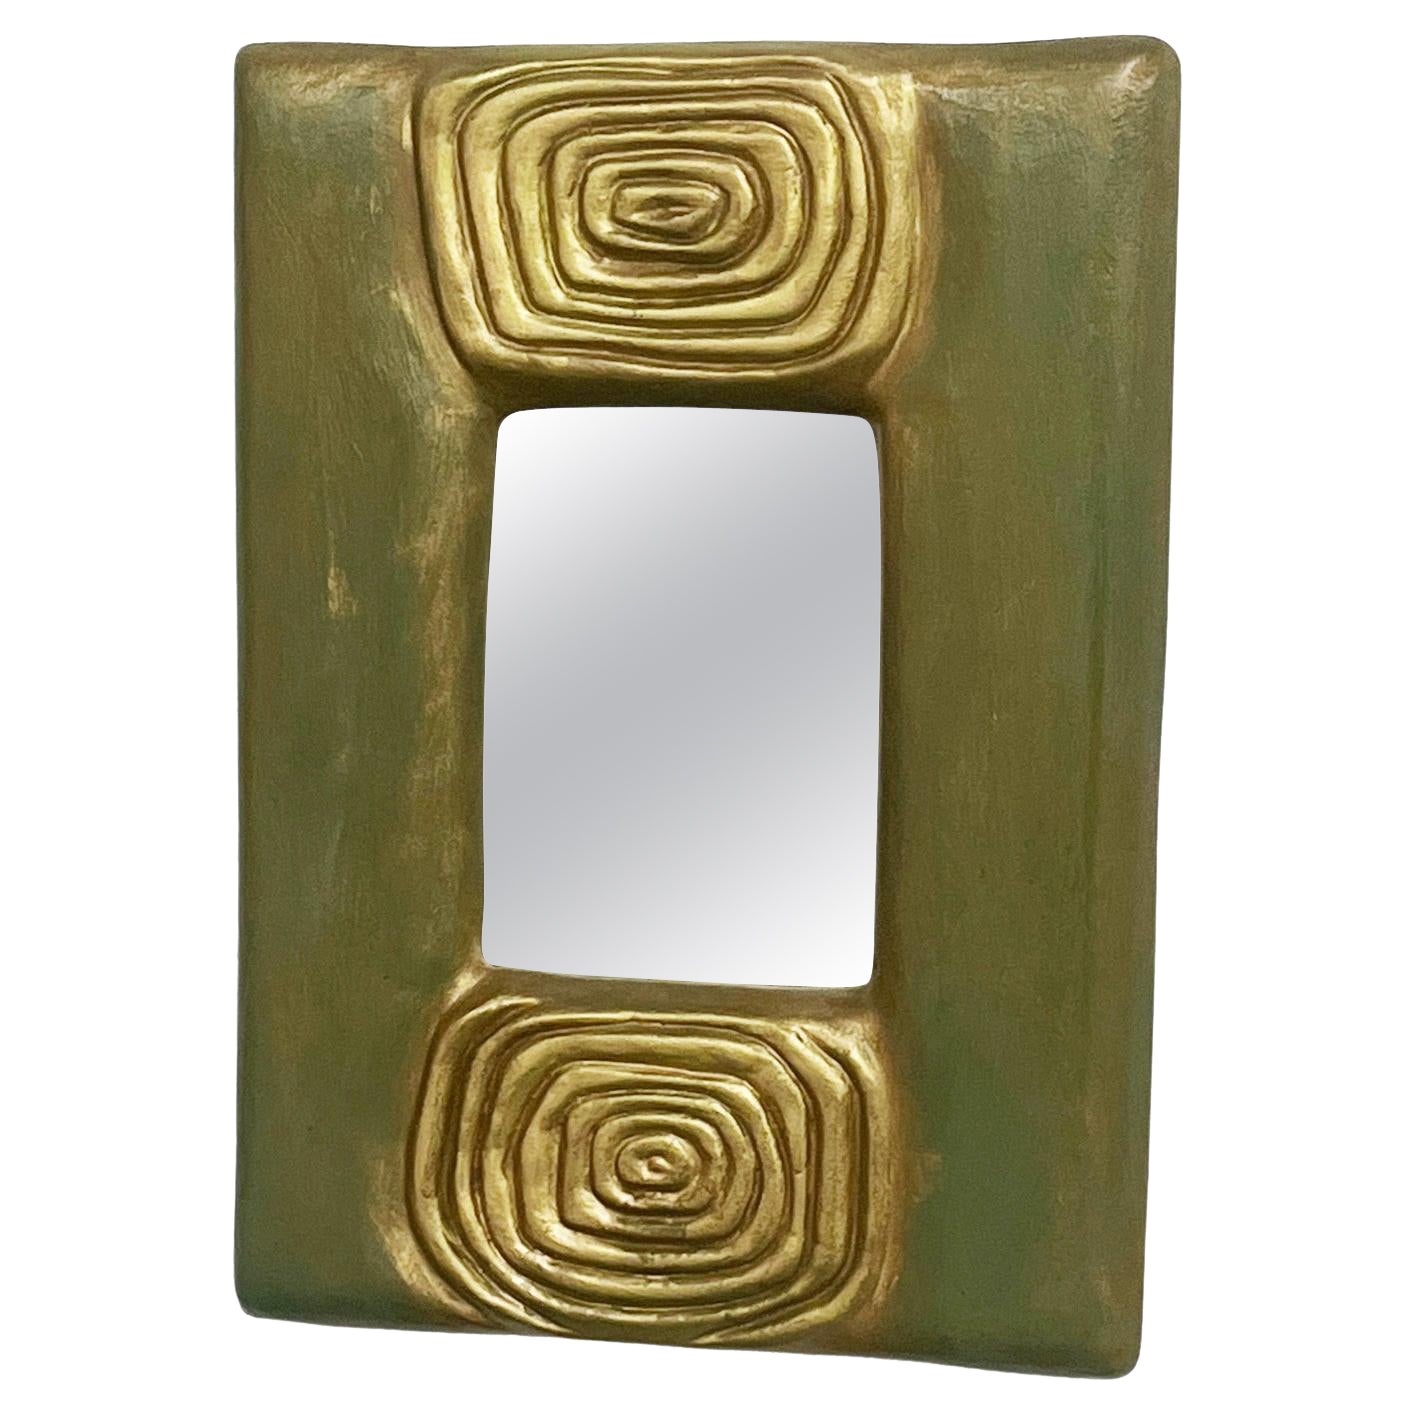 Green and Gold Ceramic Mirror by Alice Colonieu, Mid-20th century For Sale